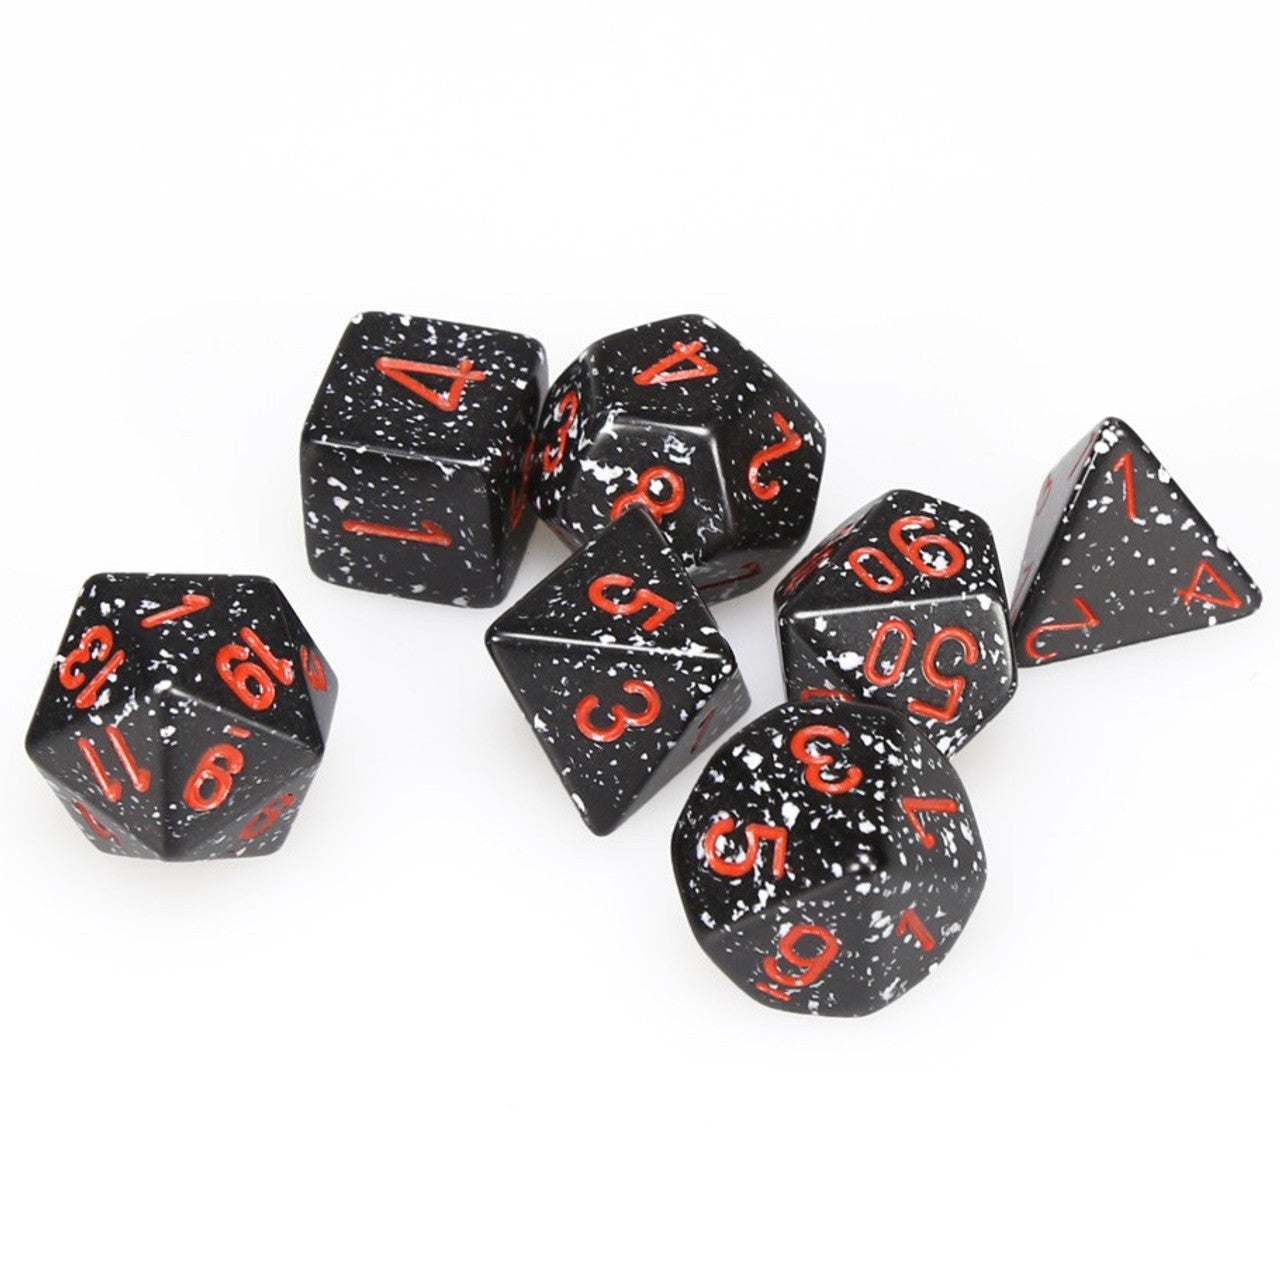 CHESSEX DICE: Polyhedral Speckled Space Dice (CHX 25308)